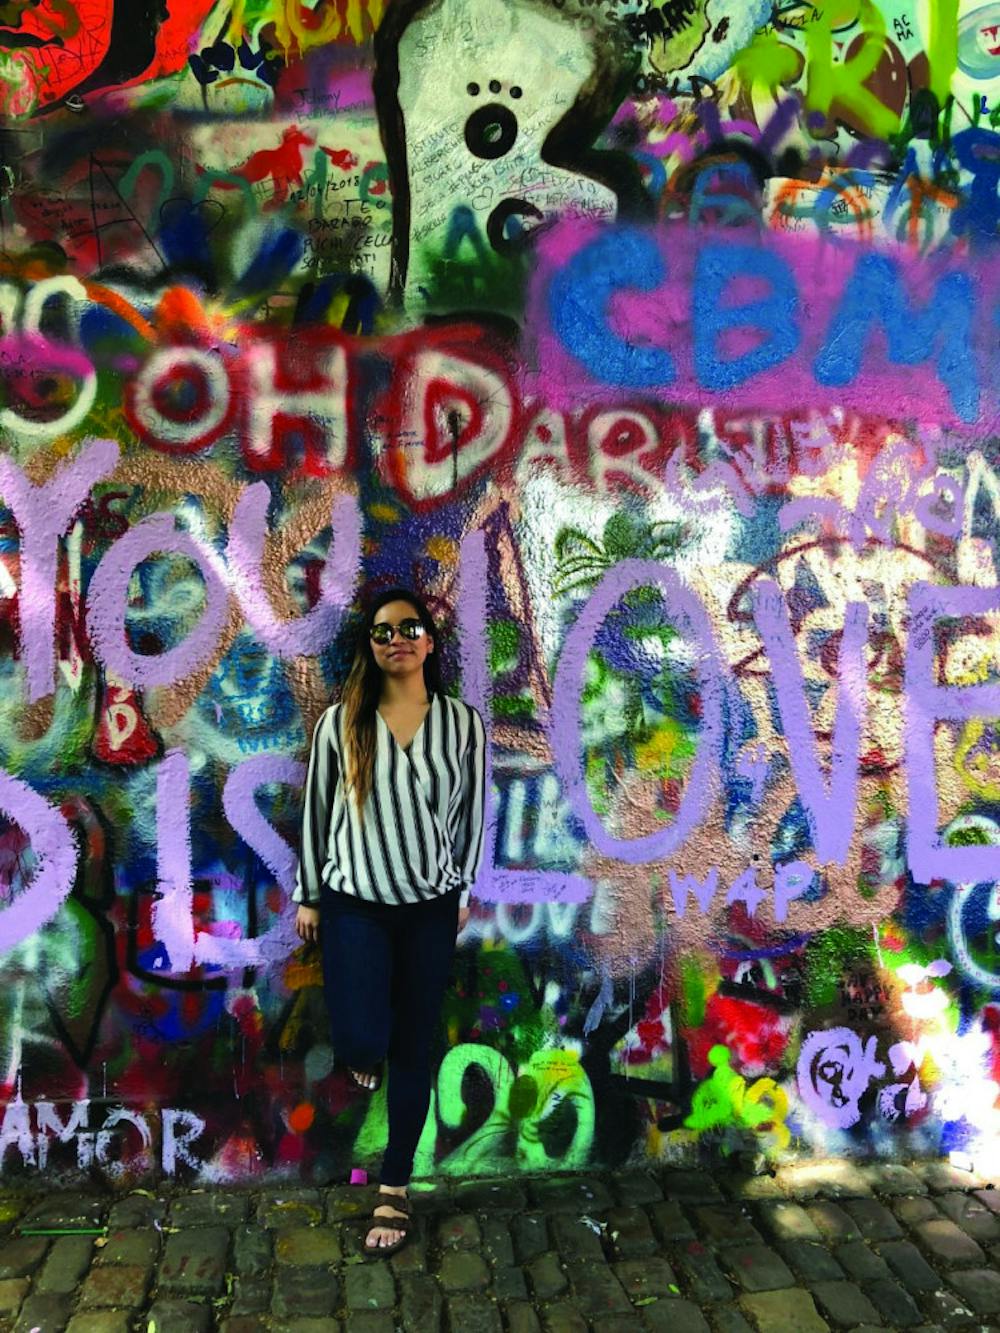 Sarah Grace Hall in front of a graffiti mural in the Czech Republic. Photo courtesy of Sarah Grace Hall